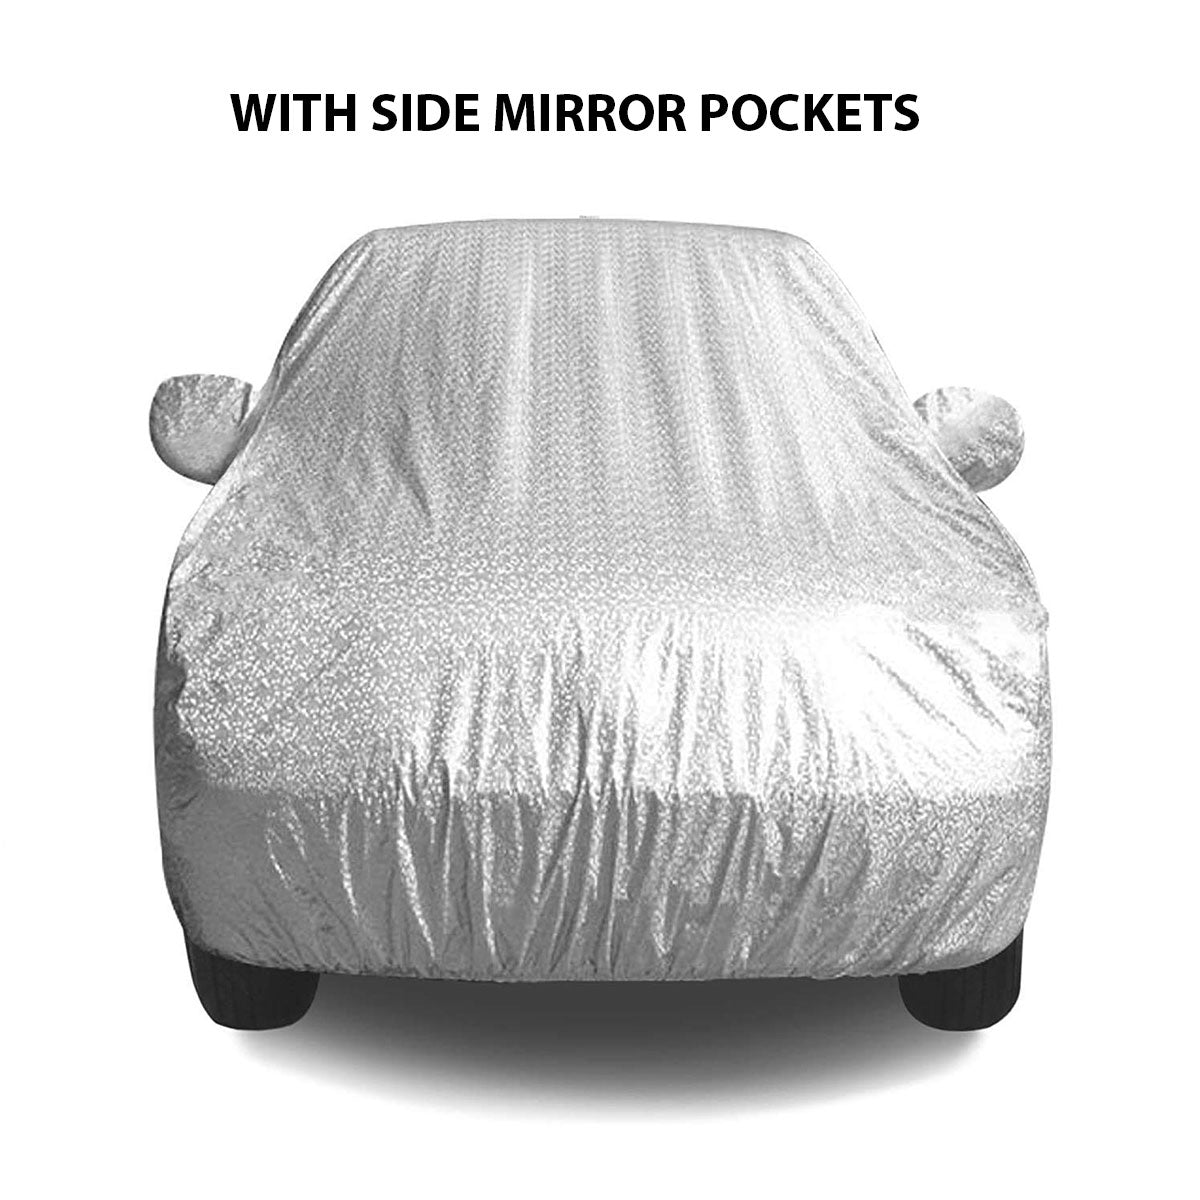 Oshotto Spyro Silver Anti Reflective, dustProof Silver and Water Proof Silver Car Body Cover with Mirror Pockets For Audi Q7 (2008-2017)